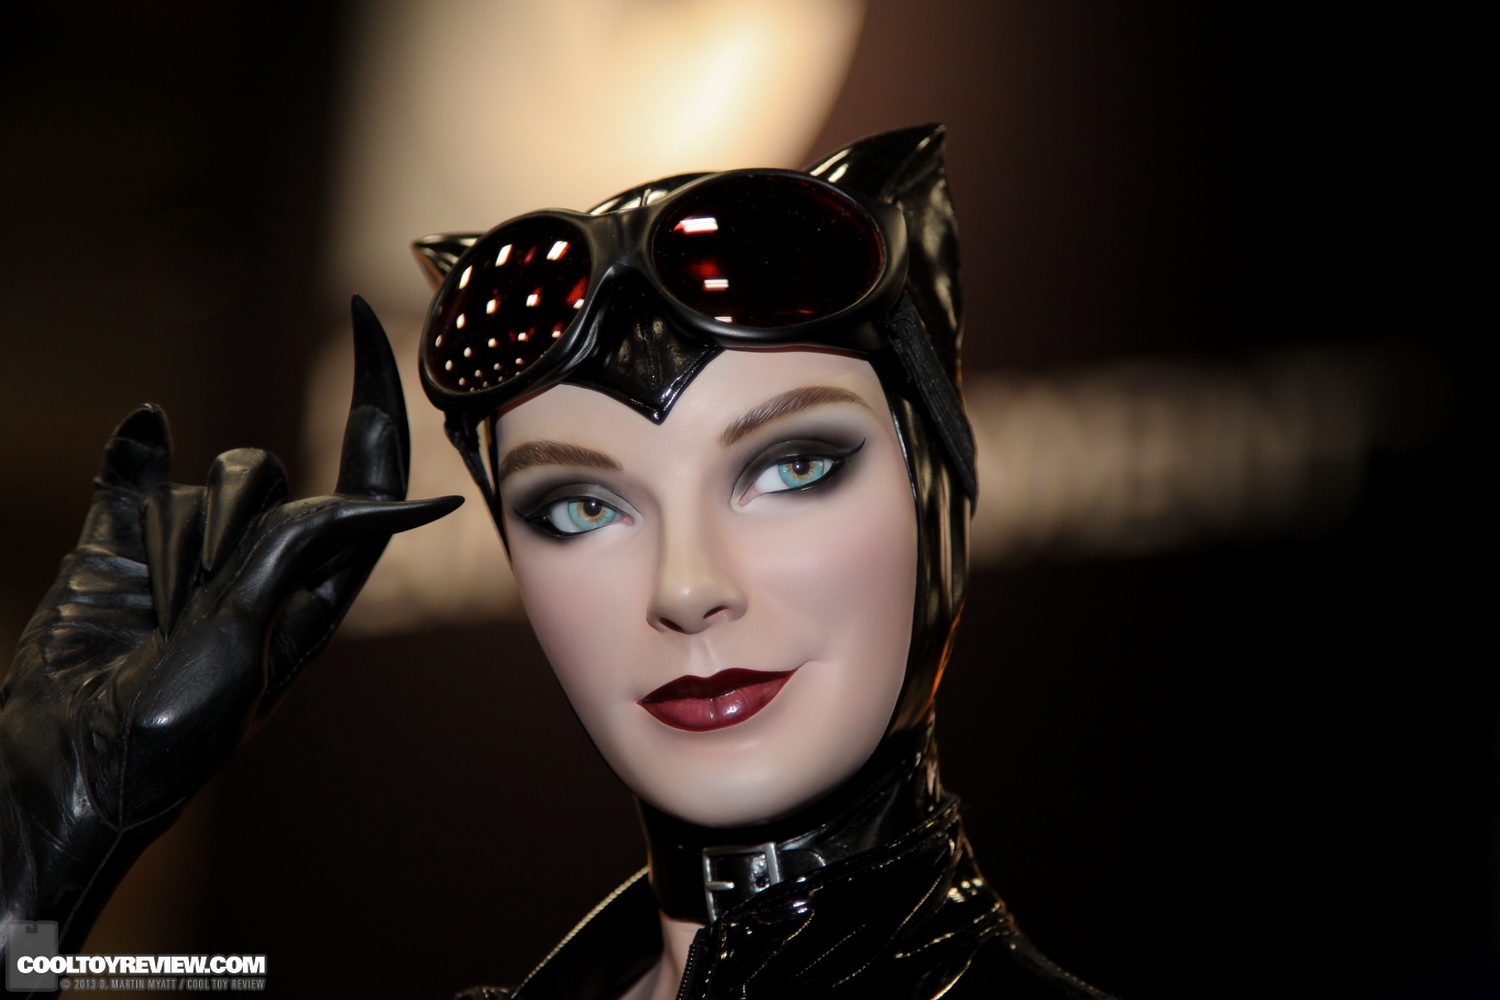 SDCC_2013_Sideshow_Collectibles_Saturday-043.jpg